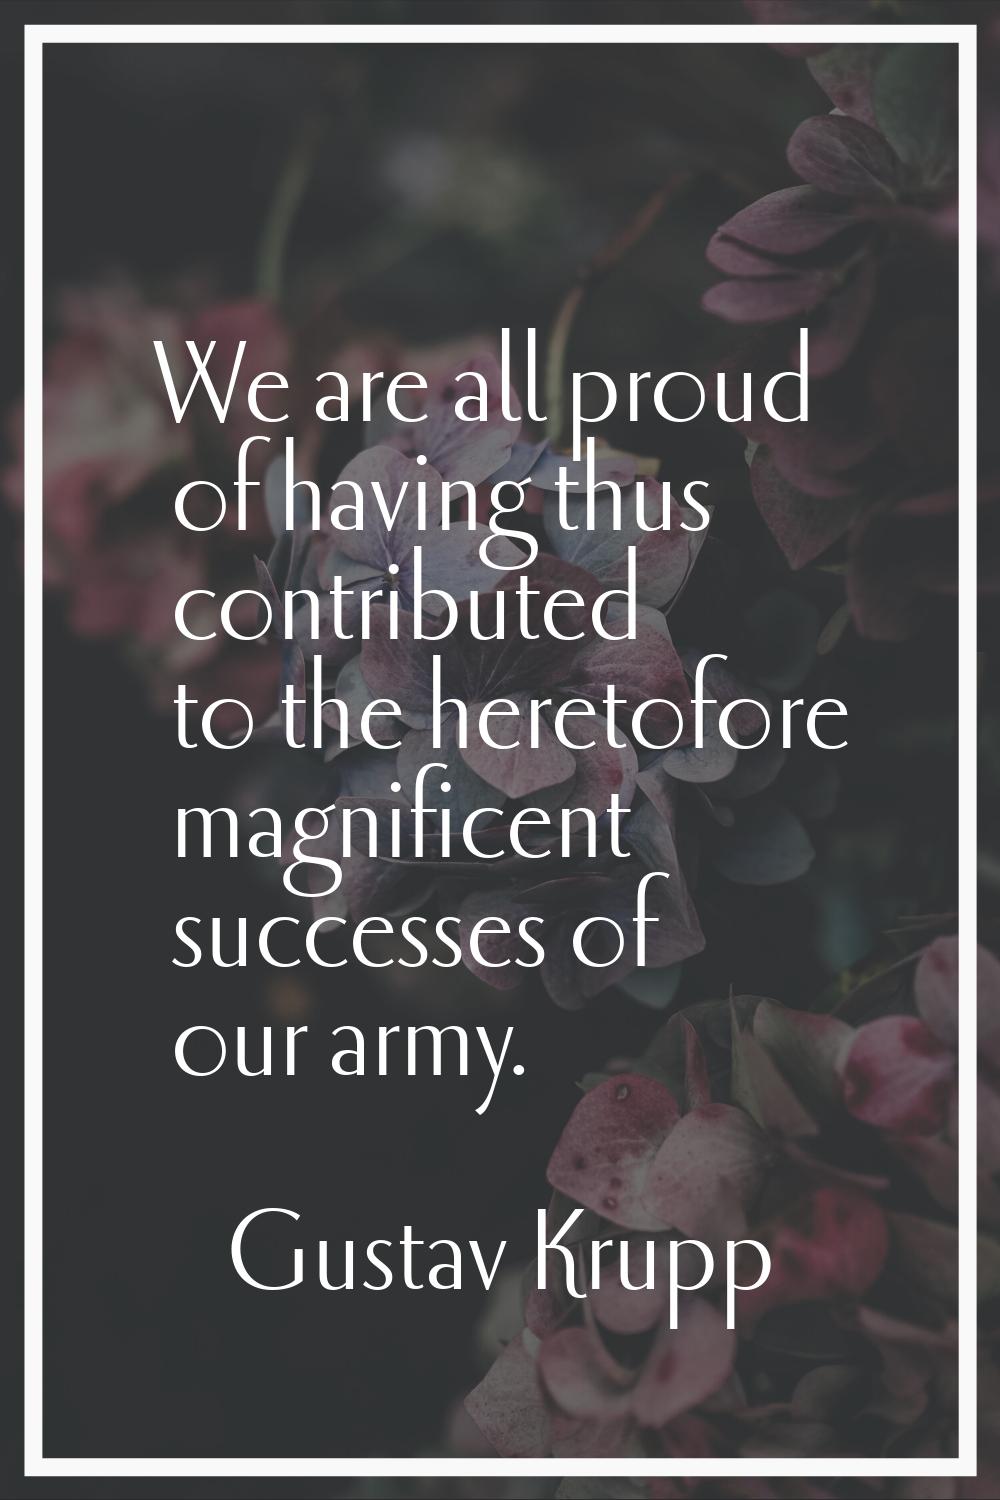 We are all proud of having thus contributed to the heretofore magnificent successes of our army.